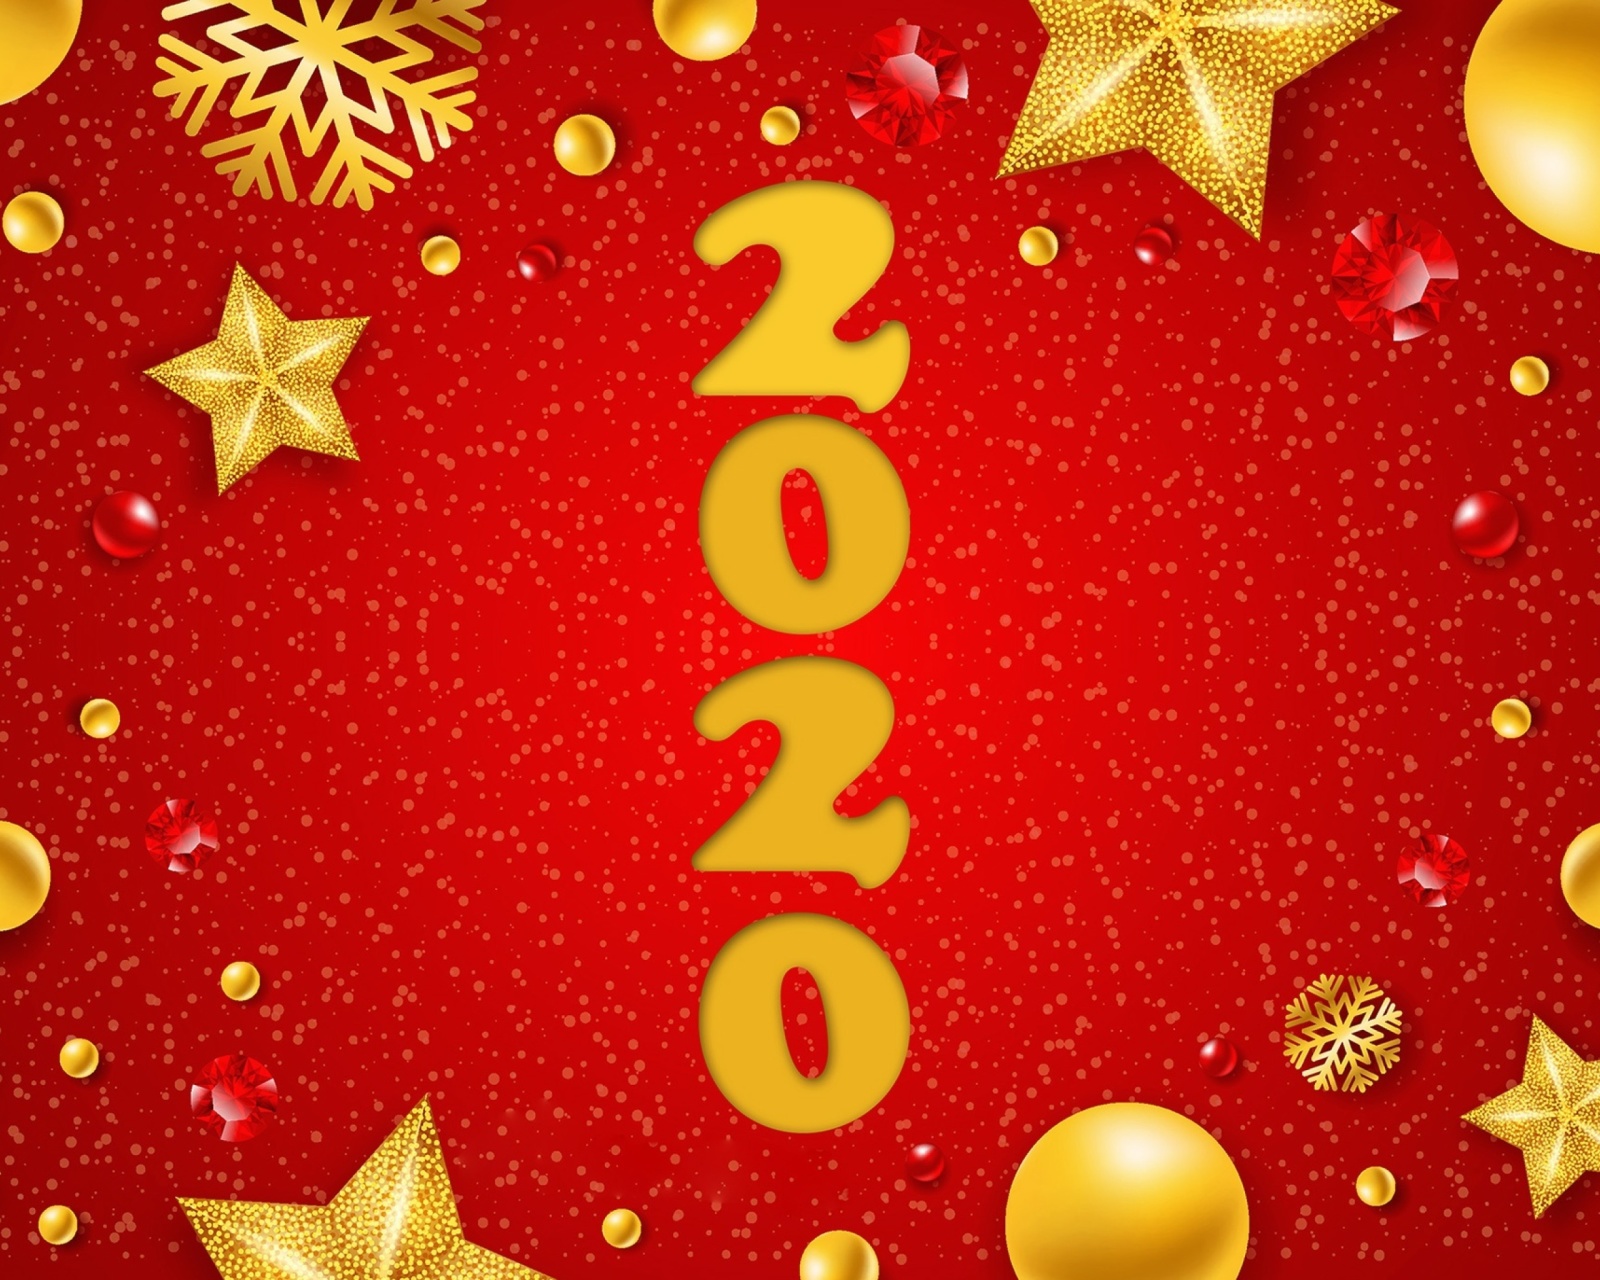 Happy New Year 2020 Messages wallpaper 1600x1280